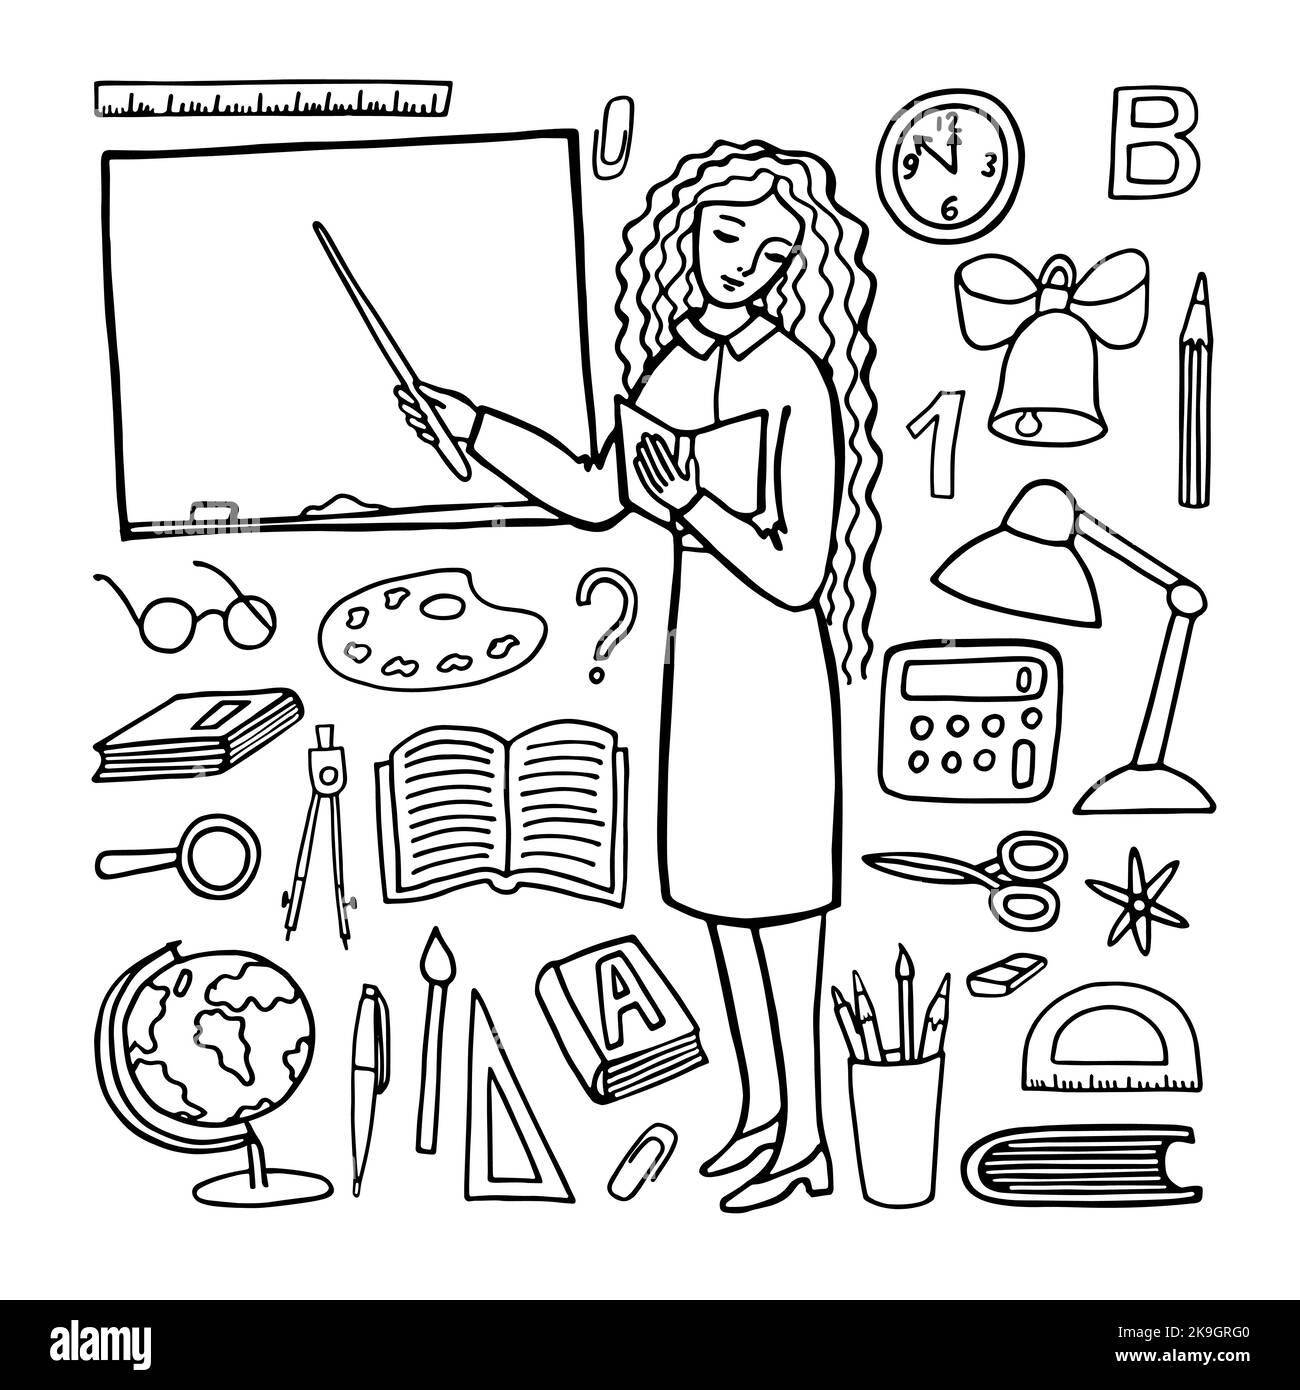 Woman teacher and teacher's supplies. Black and white drawing in doodle style. Stock Vector